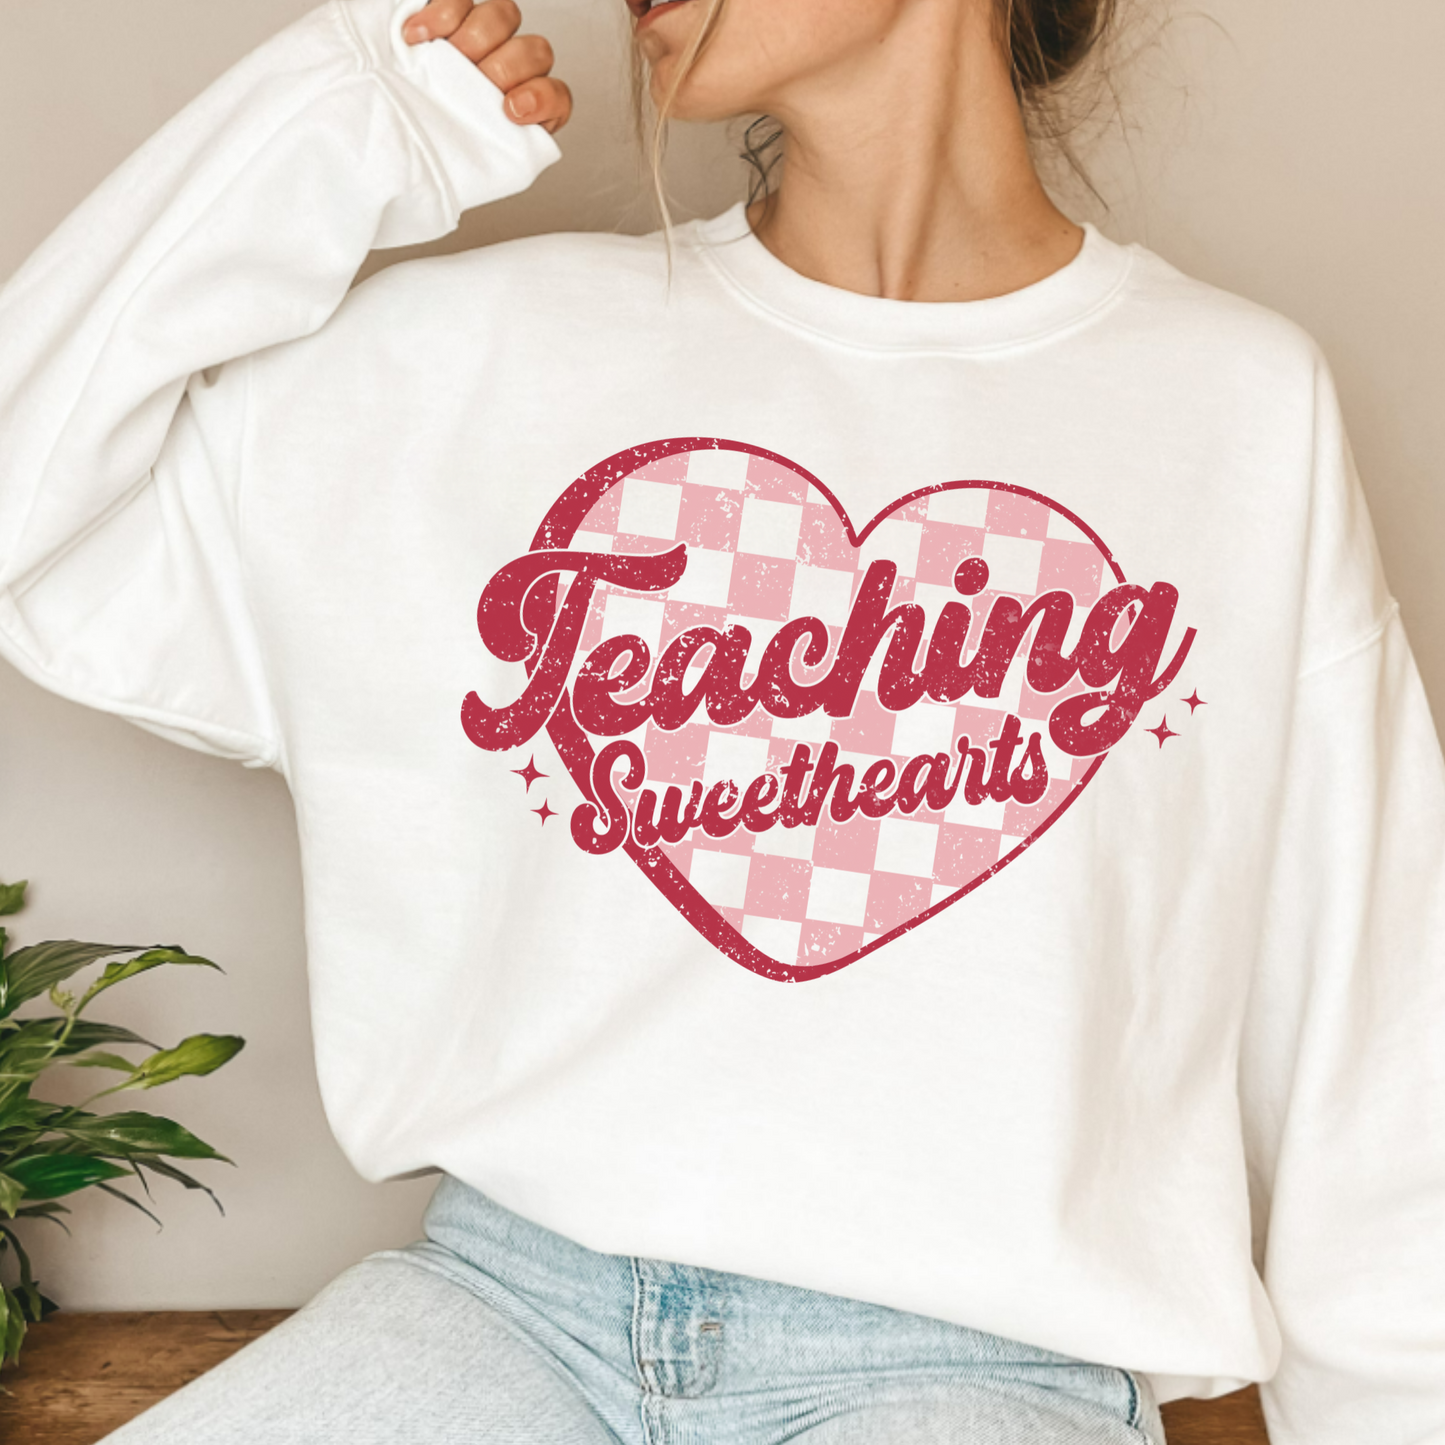 (Shirt not included) Teaching Sweethearts  -  Matte Clear Film Transfer